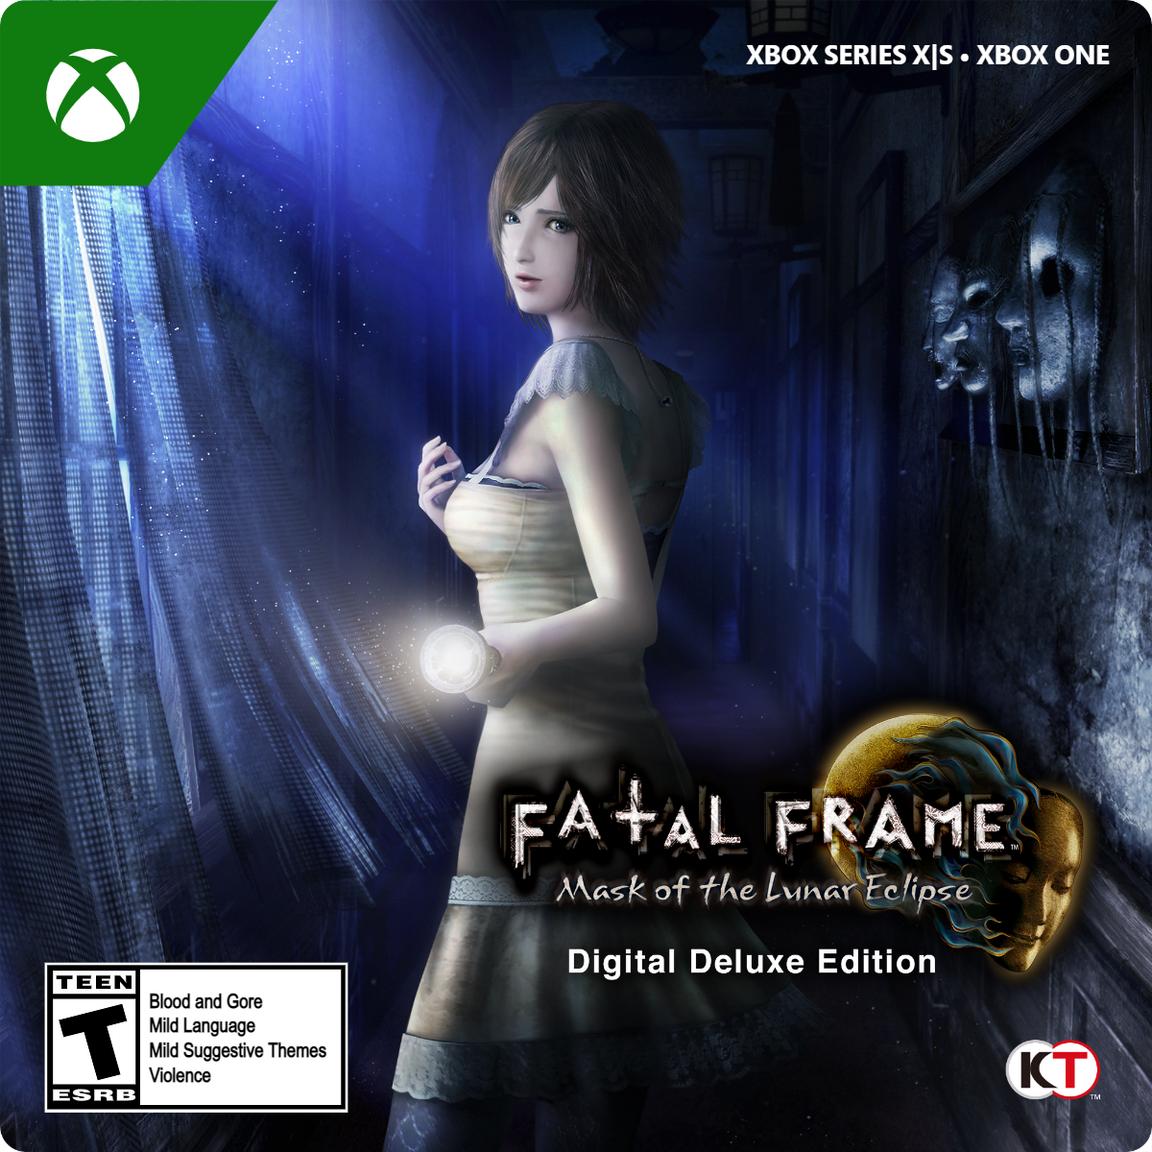 FATAL FRAME: Mask of the Lunar Eclipse Deluxe - Xbox Series X/S -  Koei Tecmo, G3Q-01843